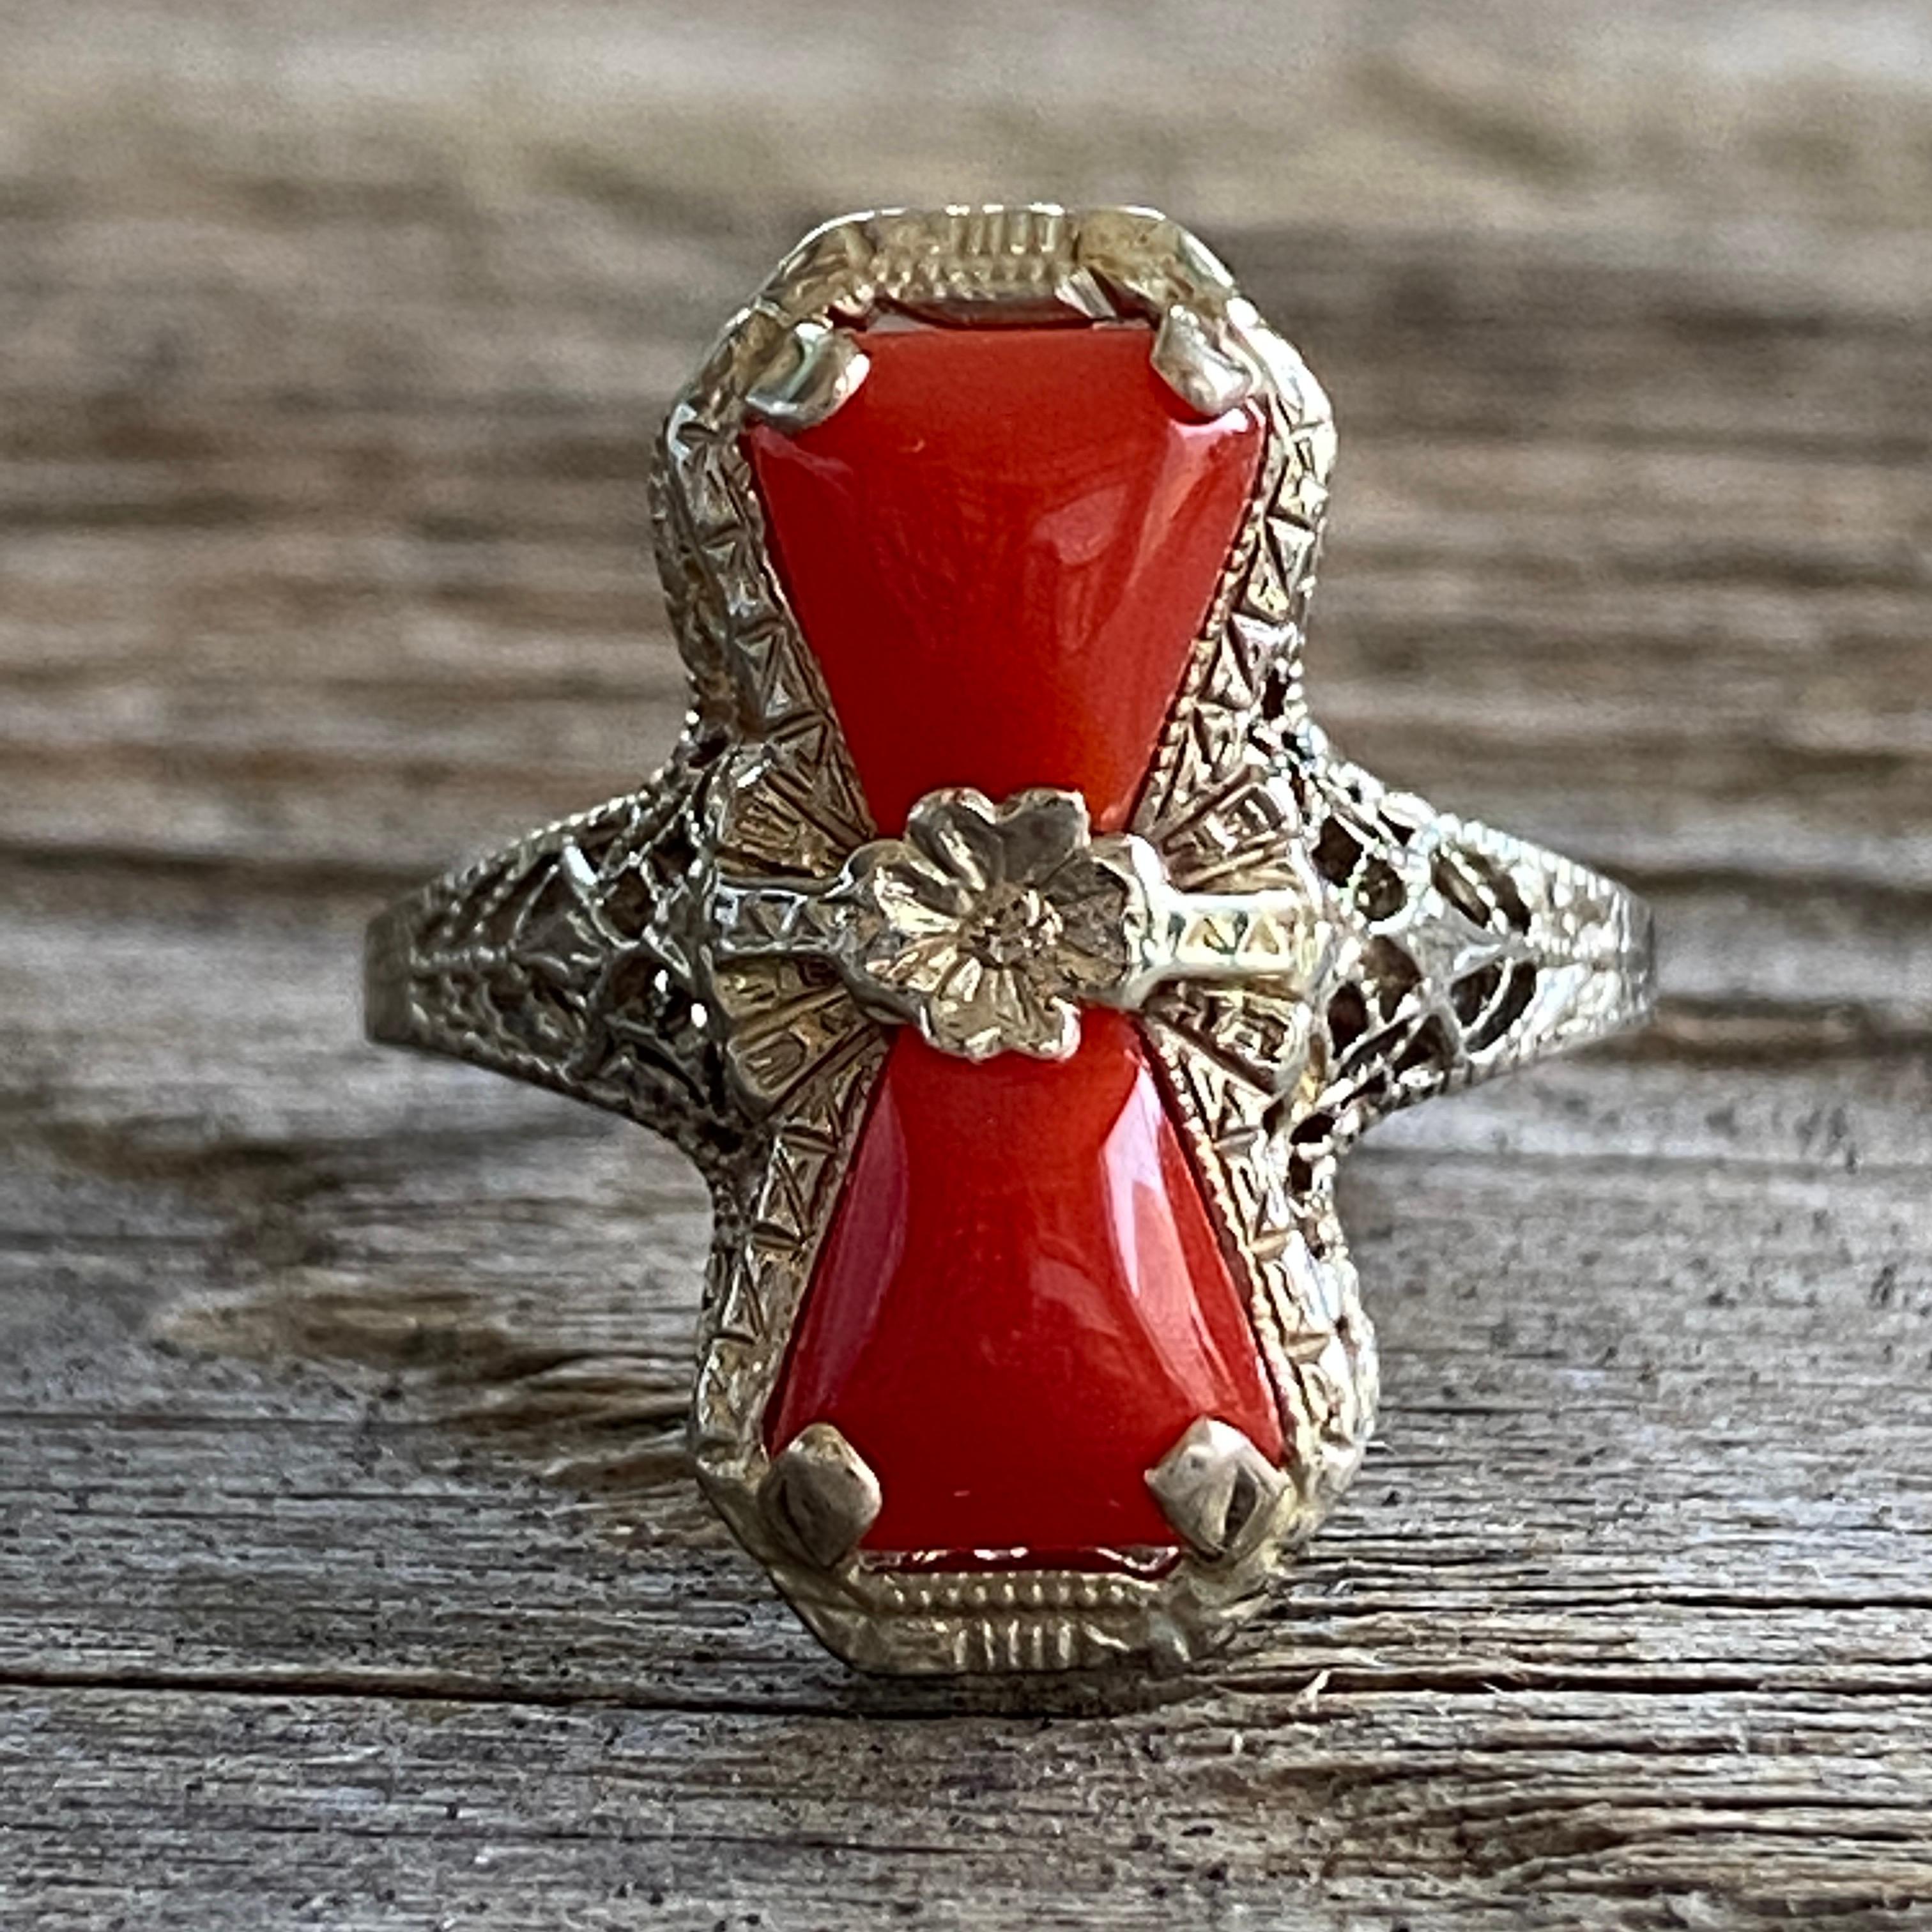 Details:
Lovely Edwardian 14K gold & natural red coral ring. The white gold filigree has lovely delicate details, a center pansy flower, with two beautiful bright red coral stones on either side. The ring is in excellent condition with no visible